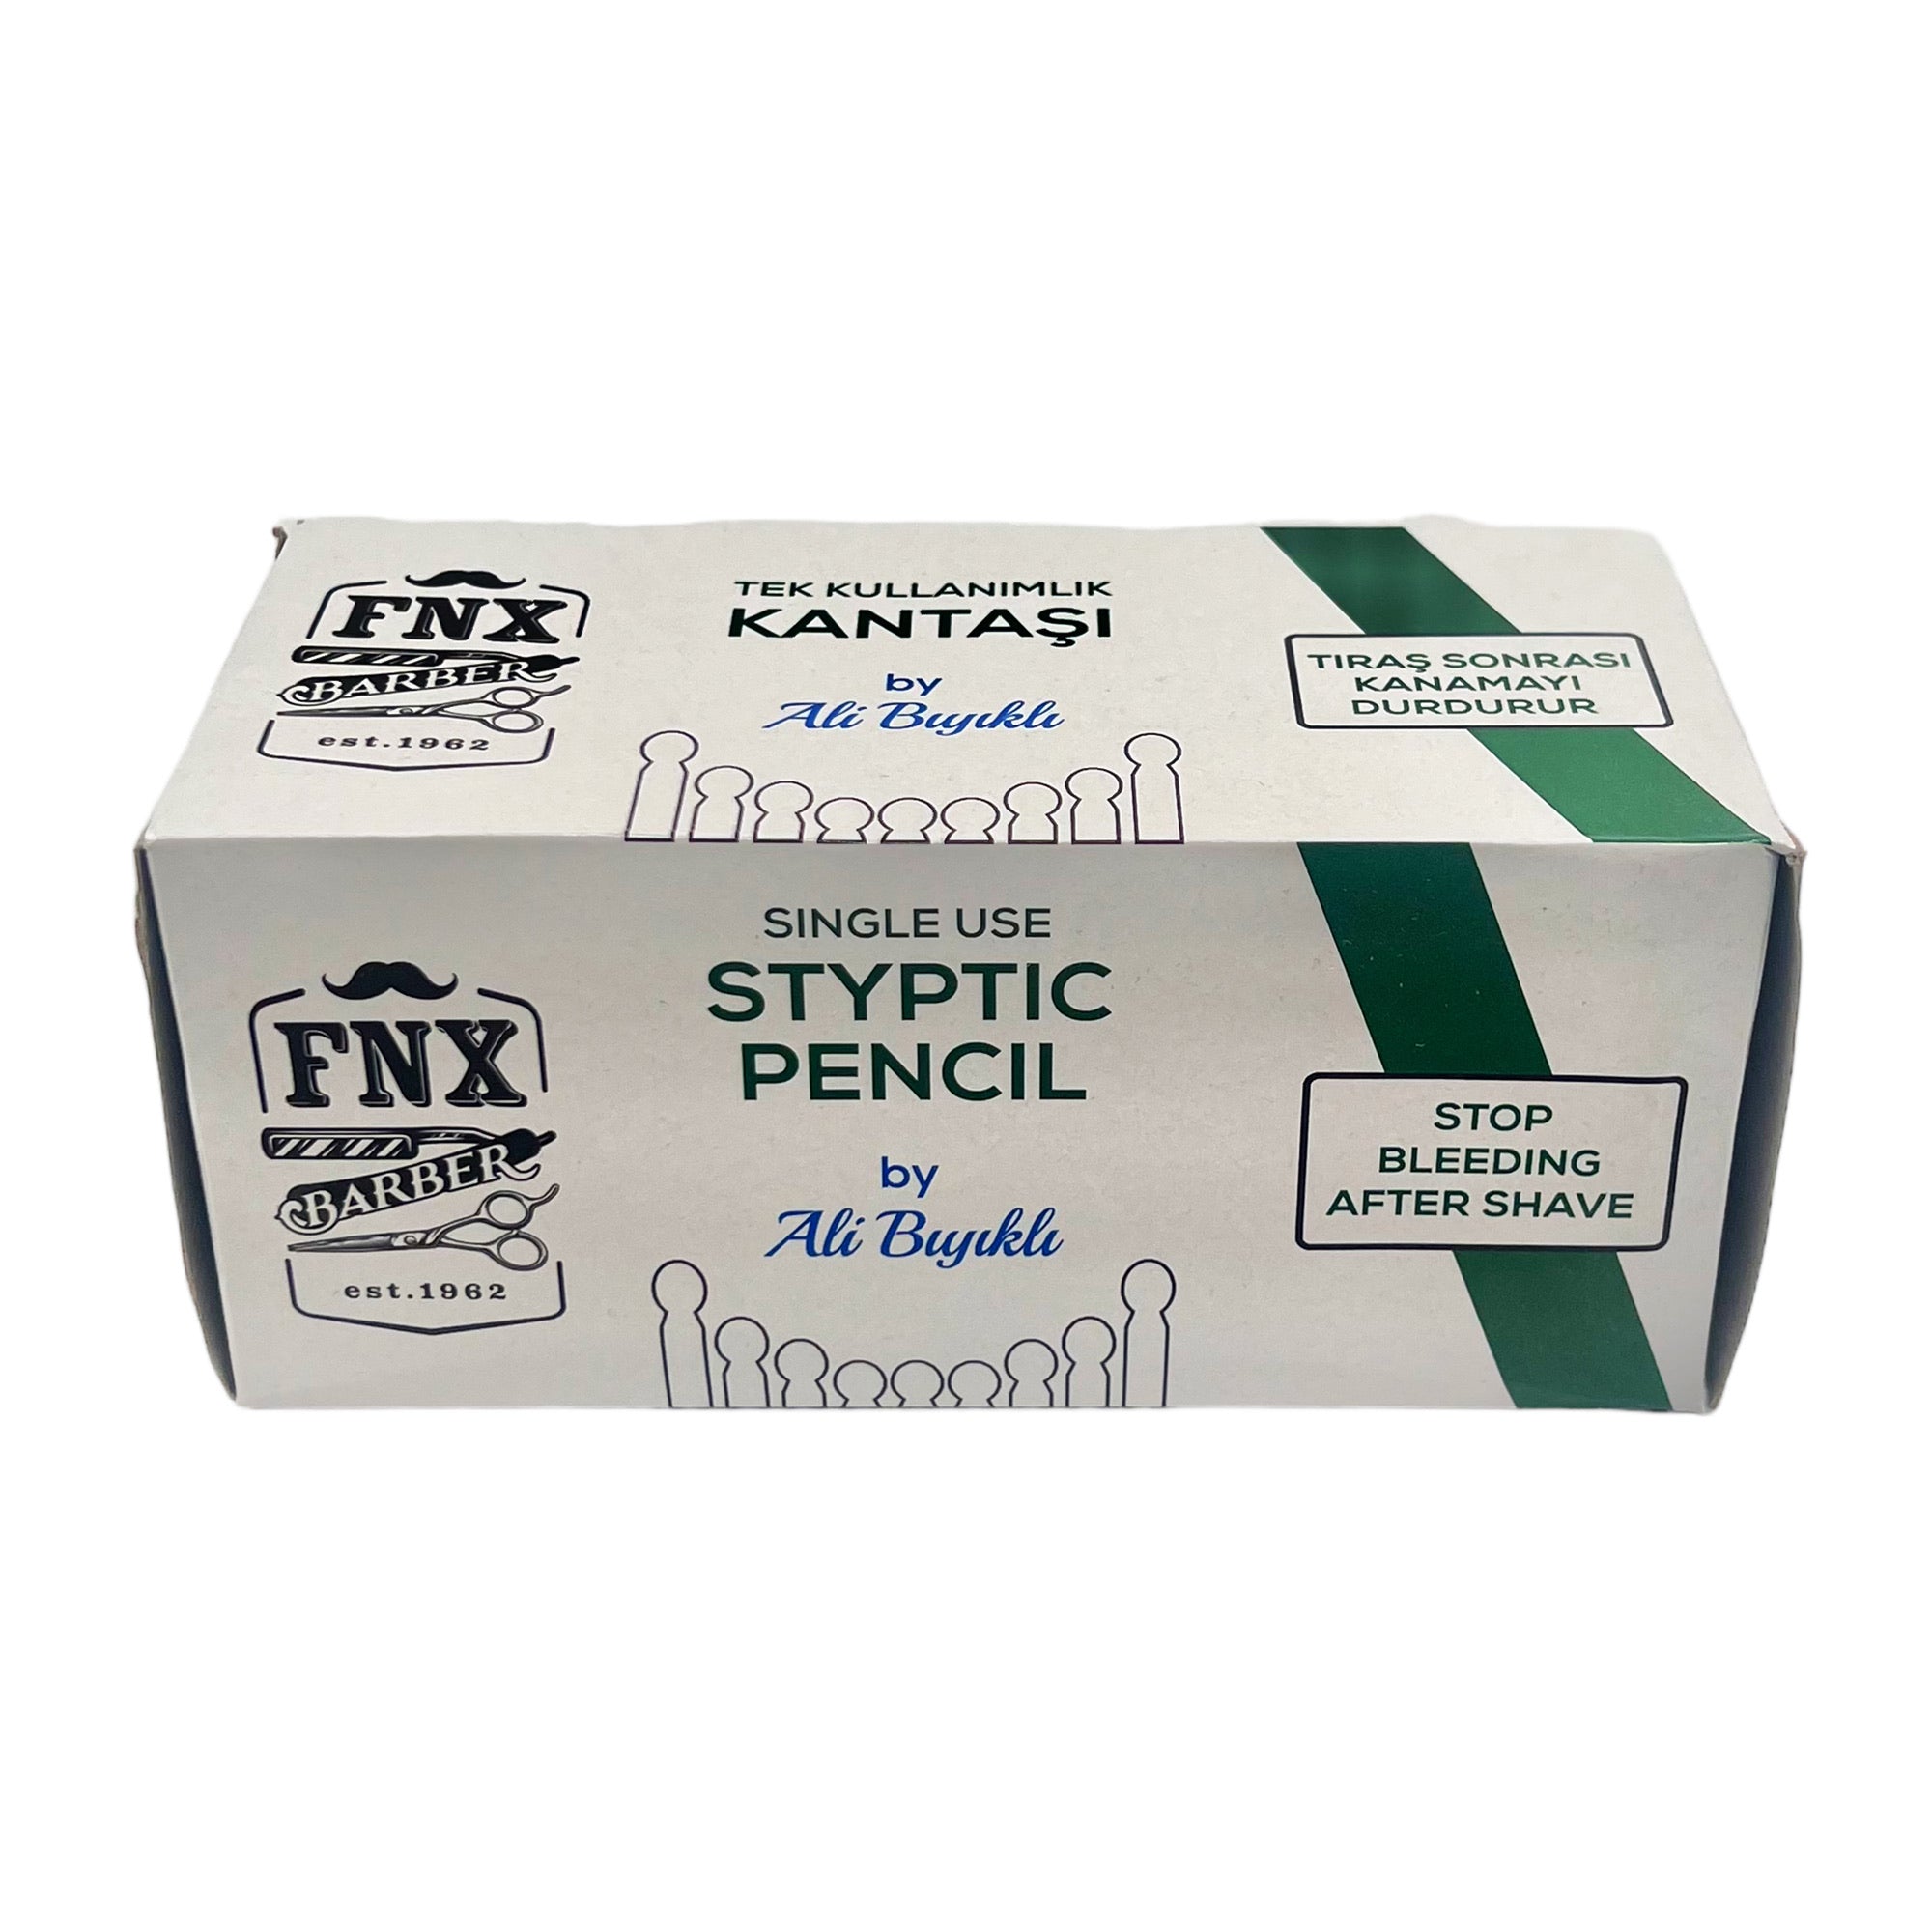 FNX Barber - Styptic Alum Matches After Shave Blood Stopper by Ali Biyikli (Pack of 24, 480pcs)